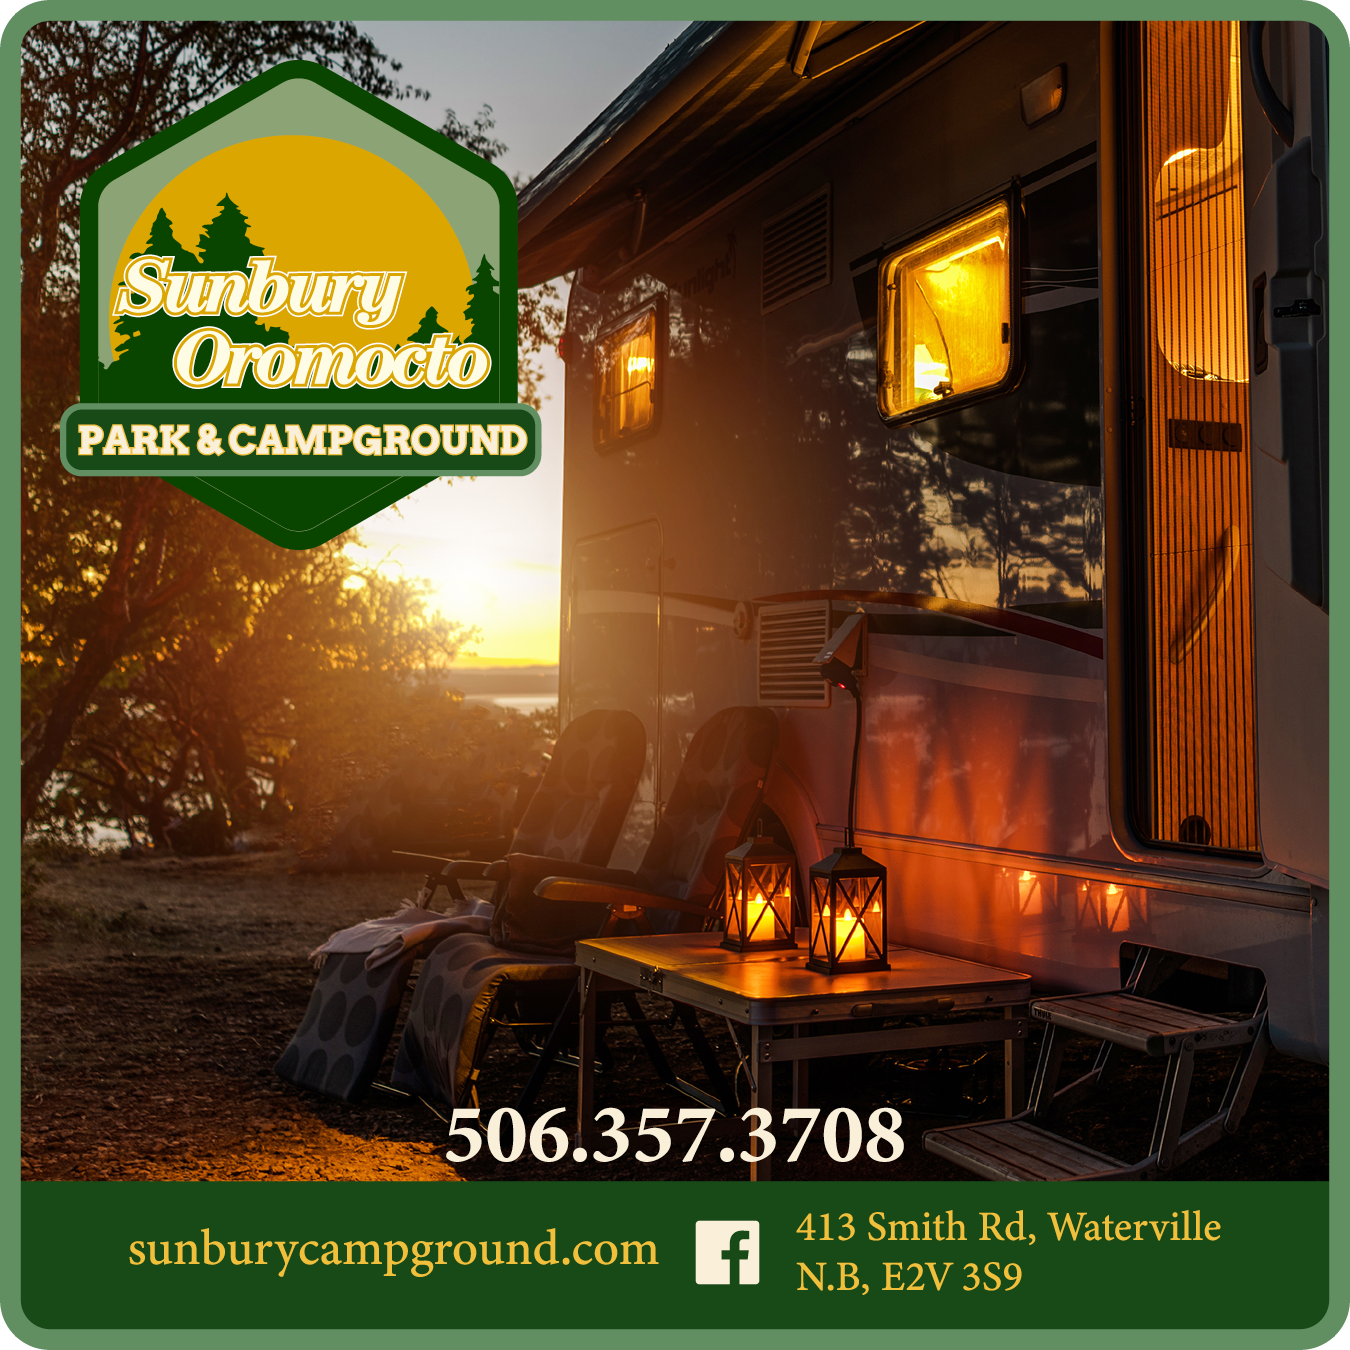 Sunbury Oromocto Park and Campground